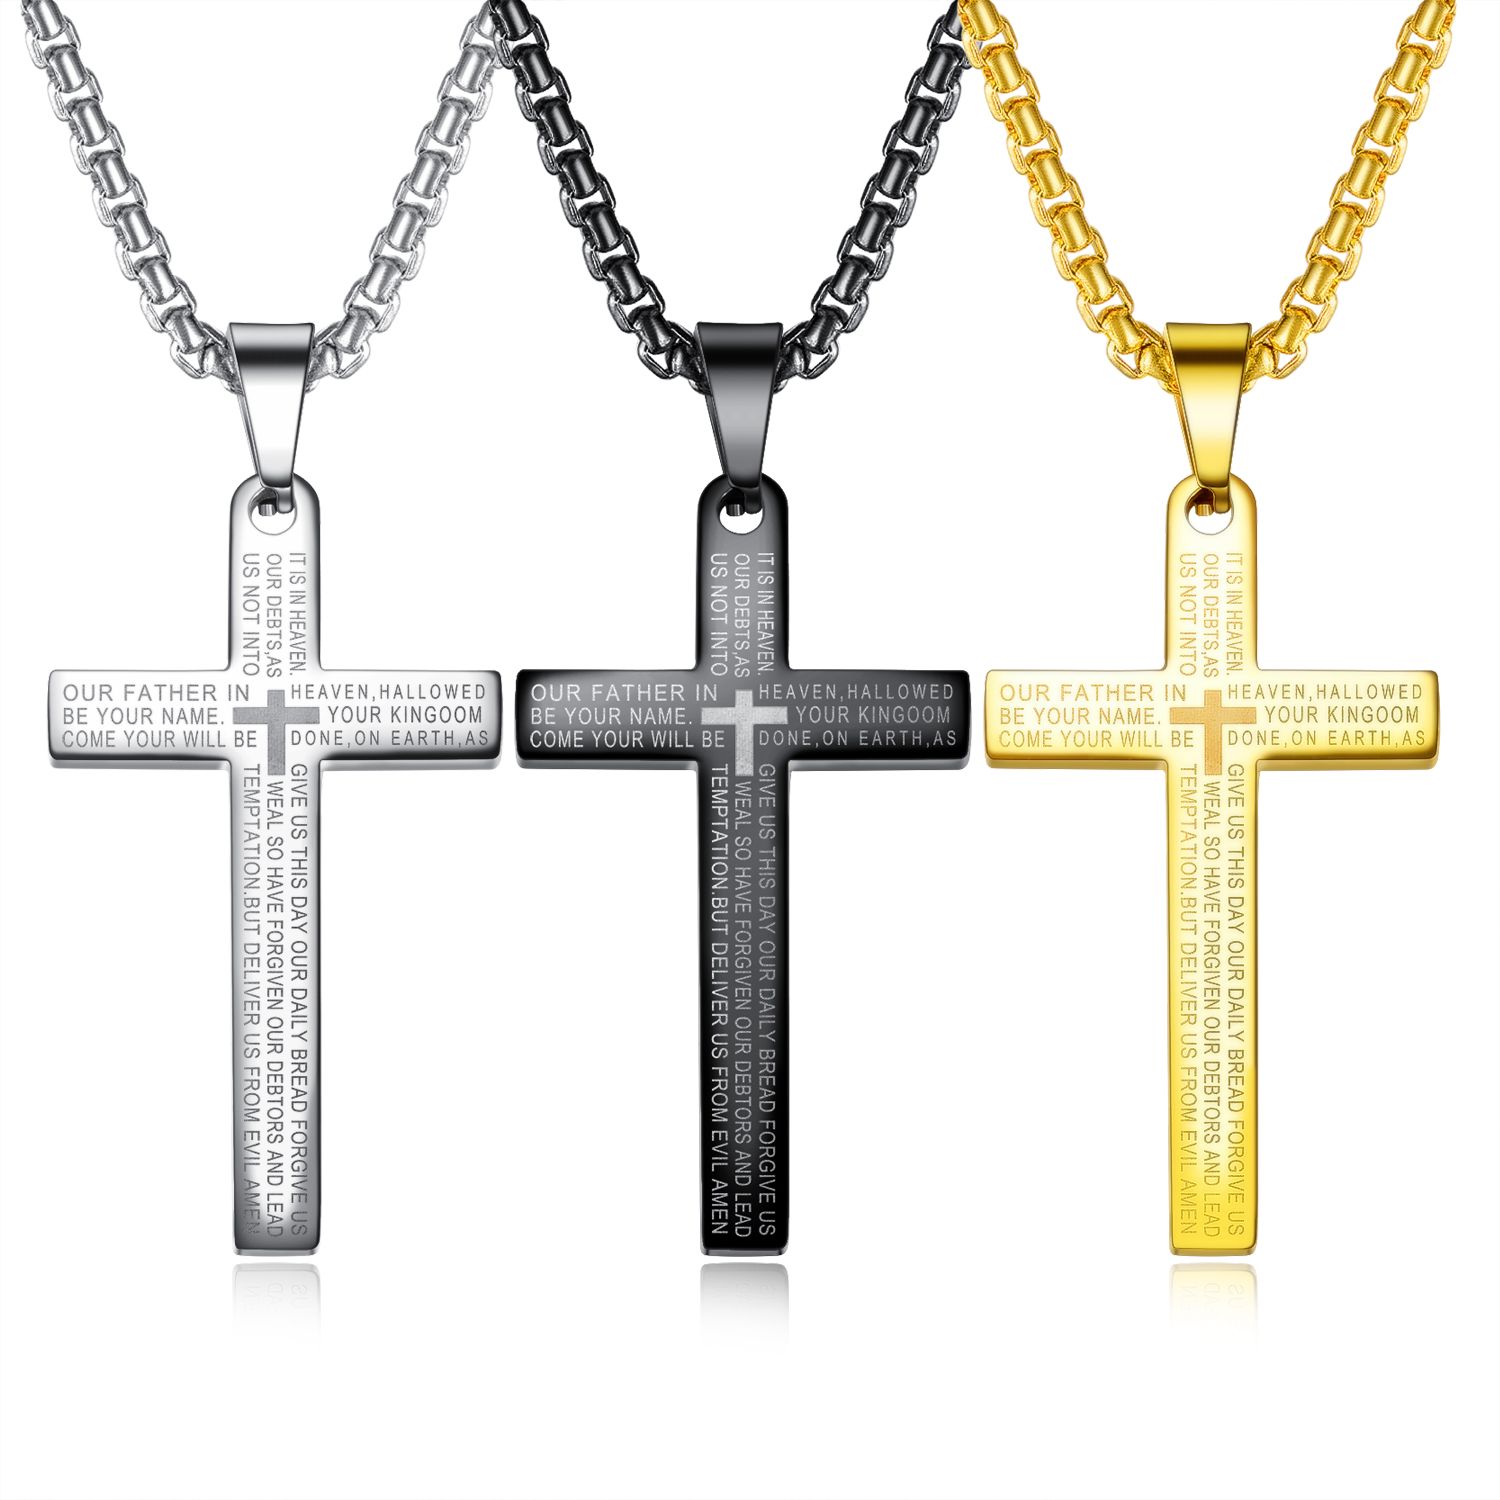 LORDS PRAYER Cross Necklace & Pendant Stainless Steel SILVER BLACK OR BLUE UK 